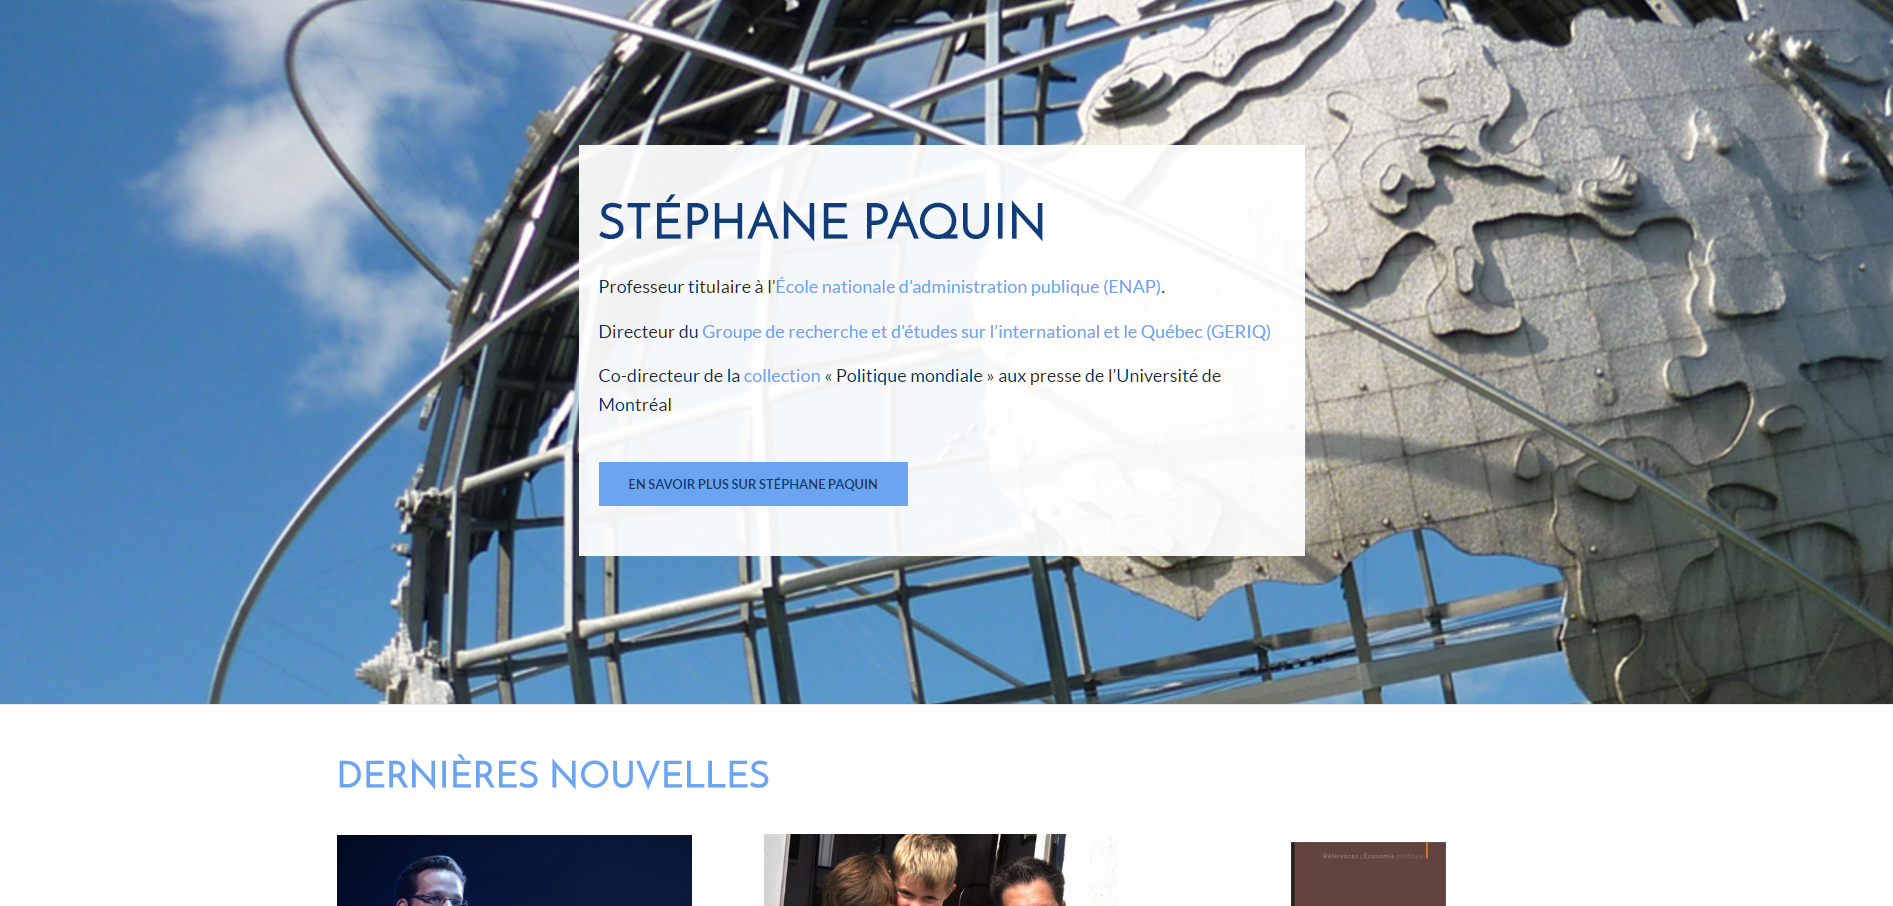 Stéphane Paquin website by Appwapp